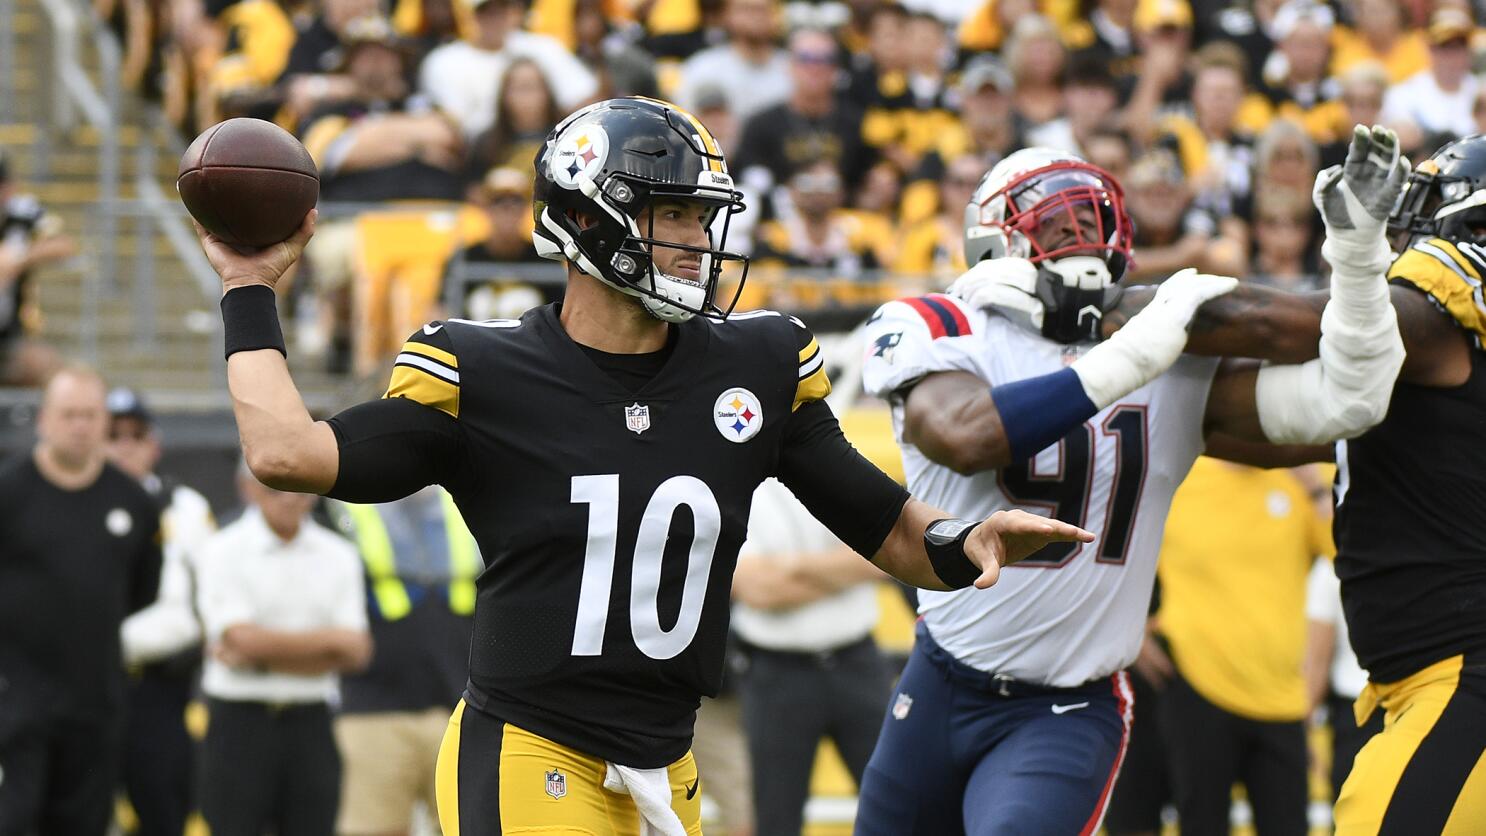 The Steelers need a real NFL offense